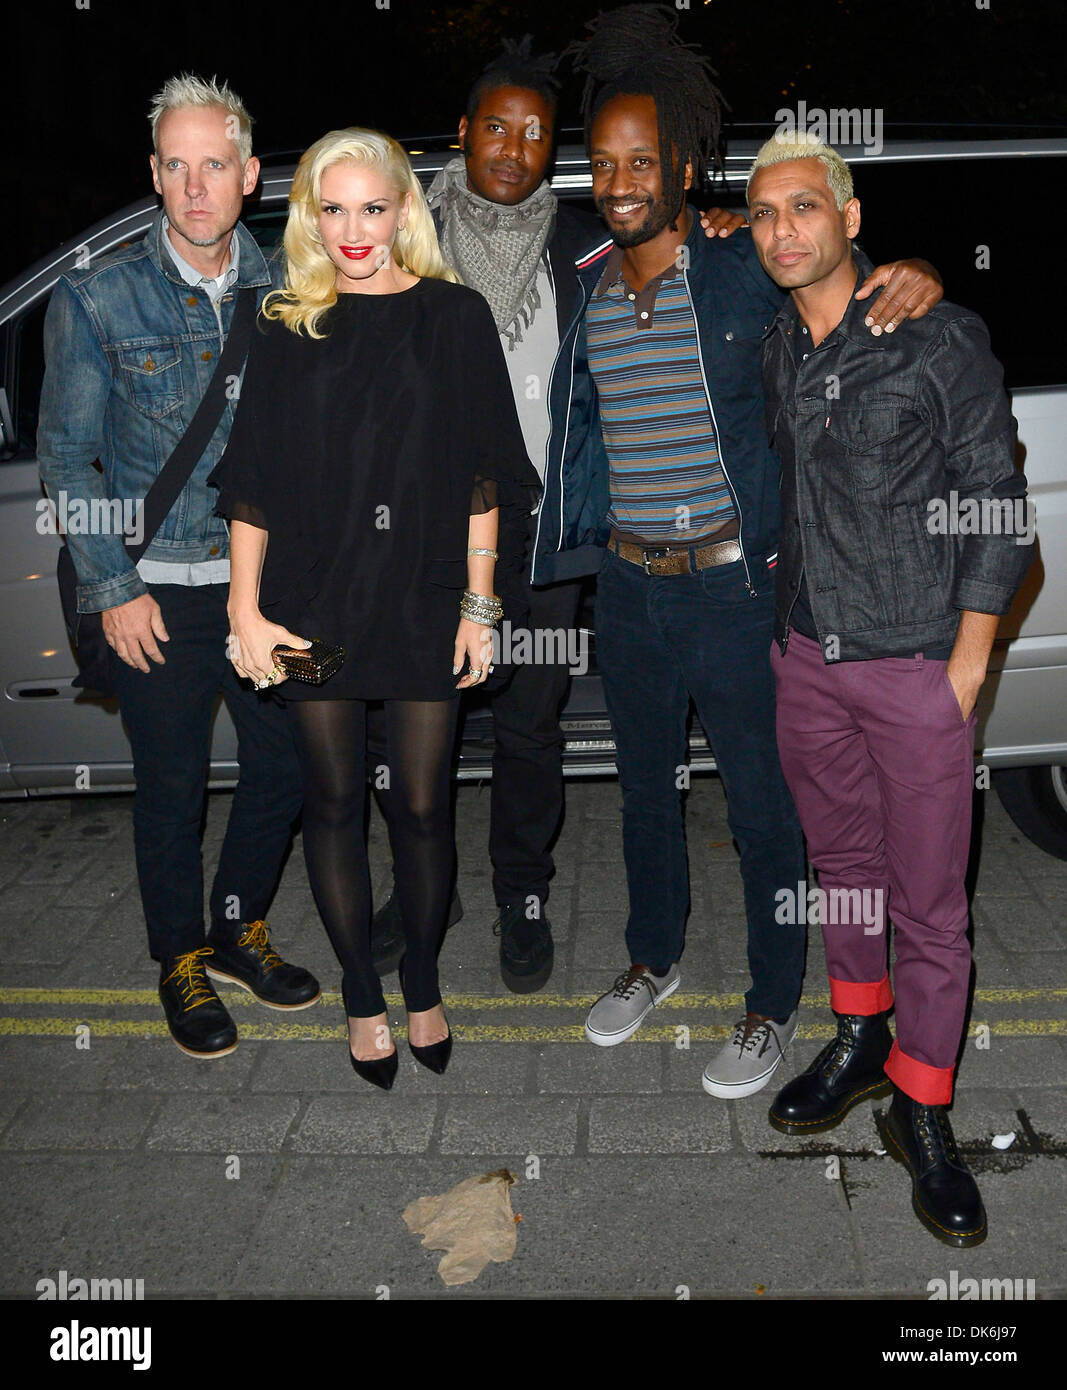 Gwen Stefani Dressed In A Short Top And Black Tights With Band Members